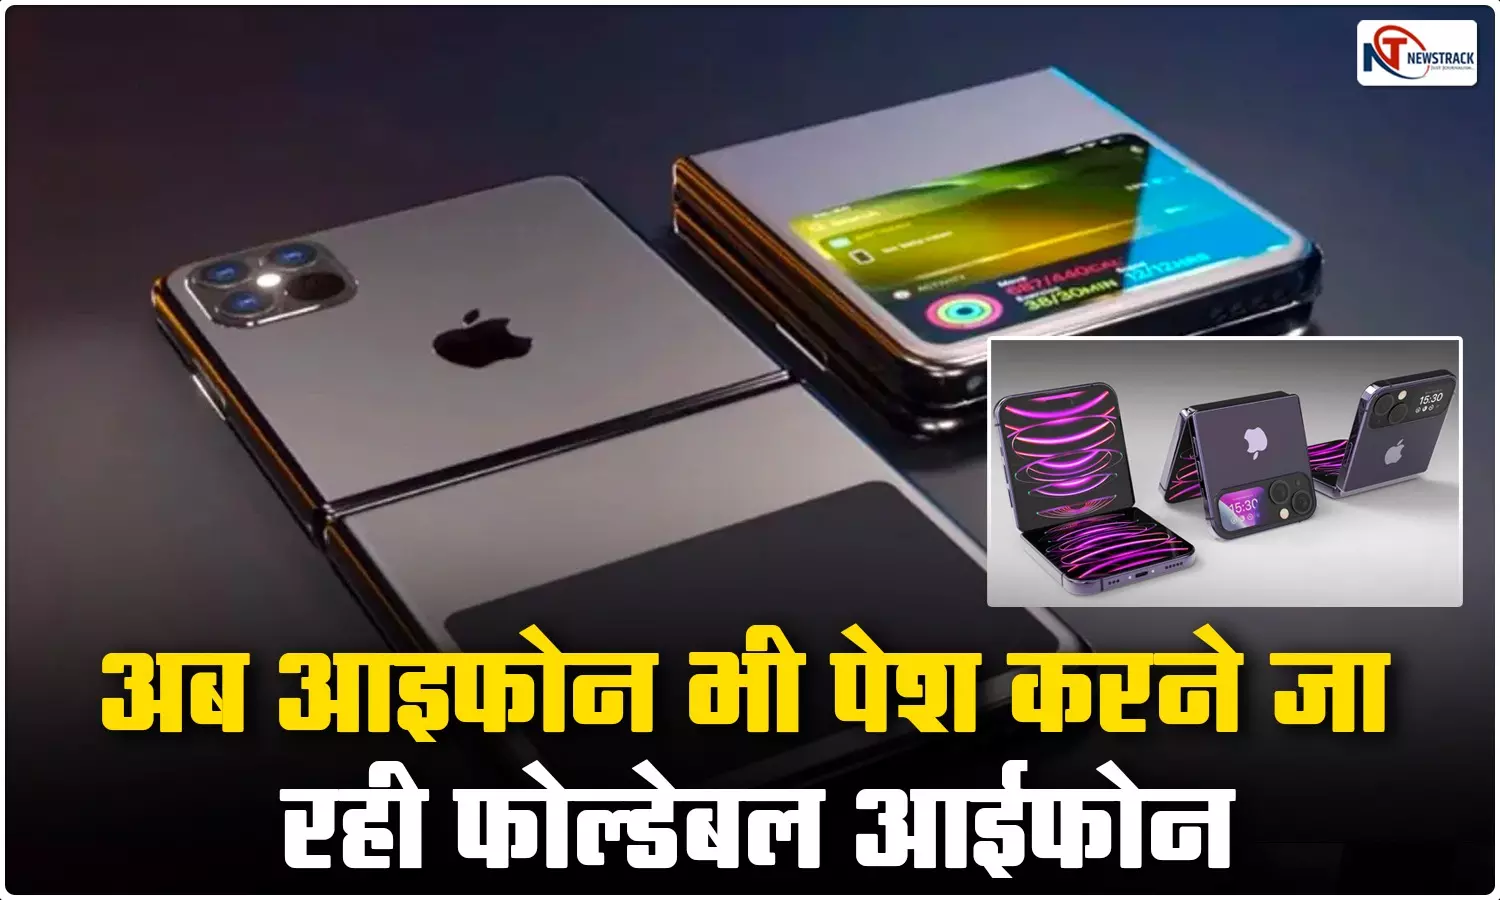 Apple foldable iPhones and iPads